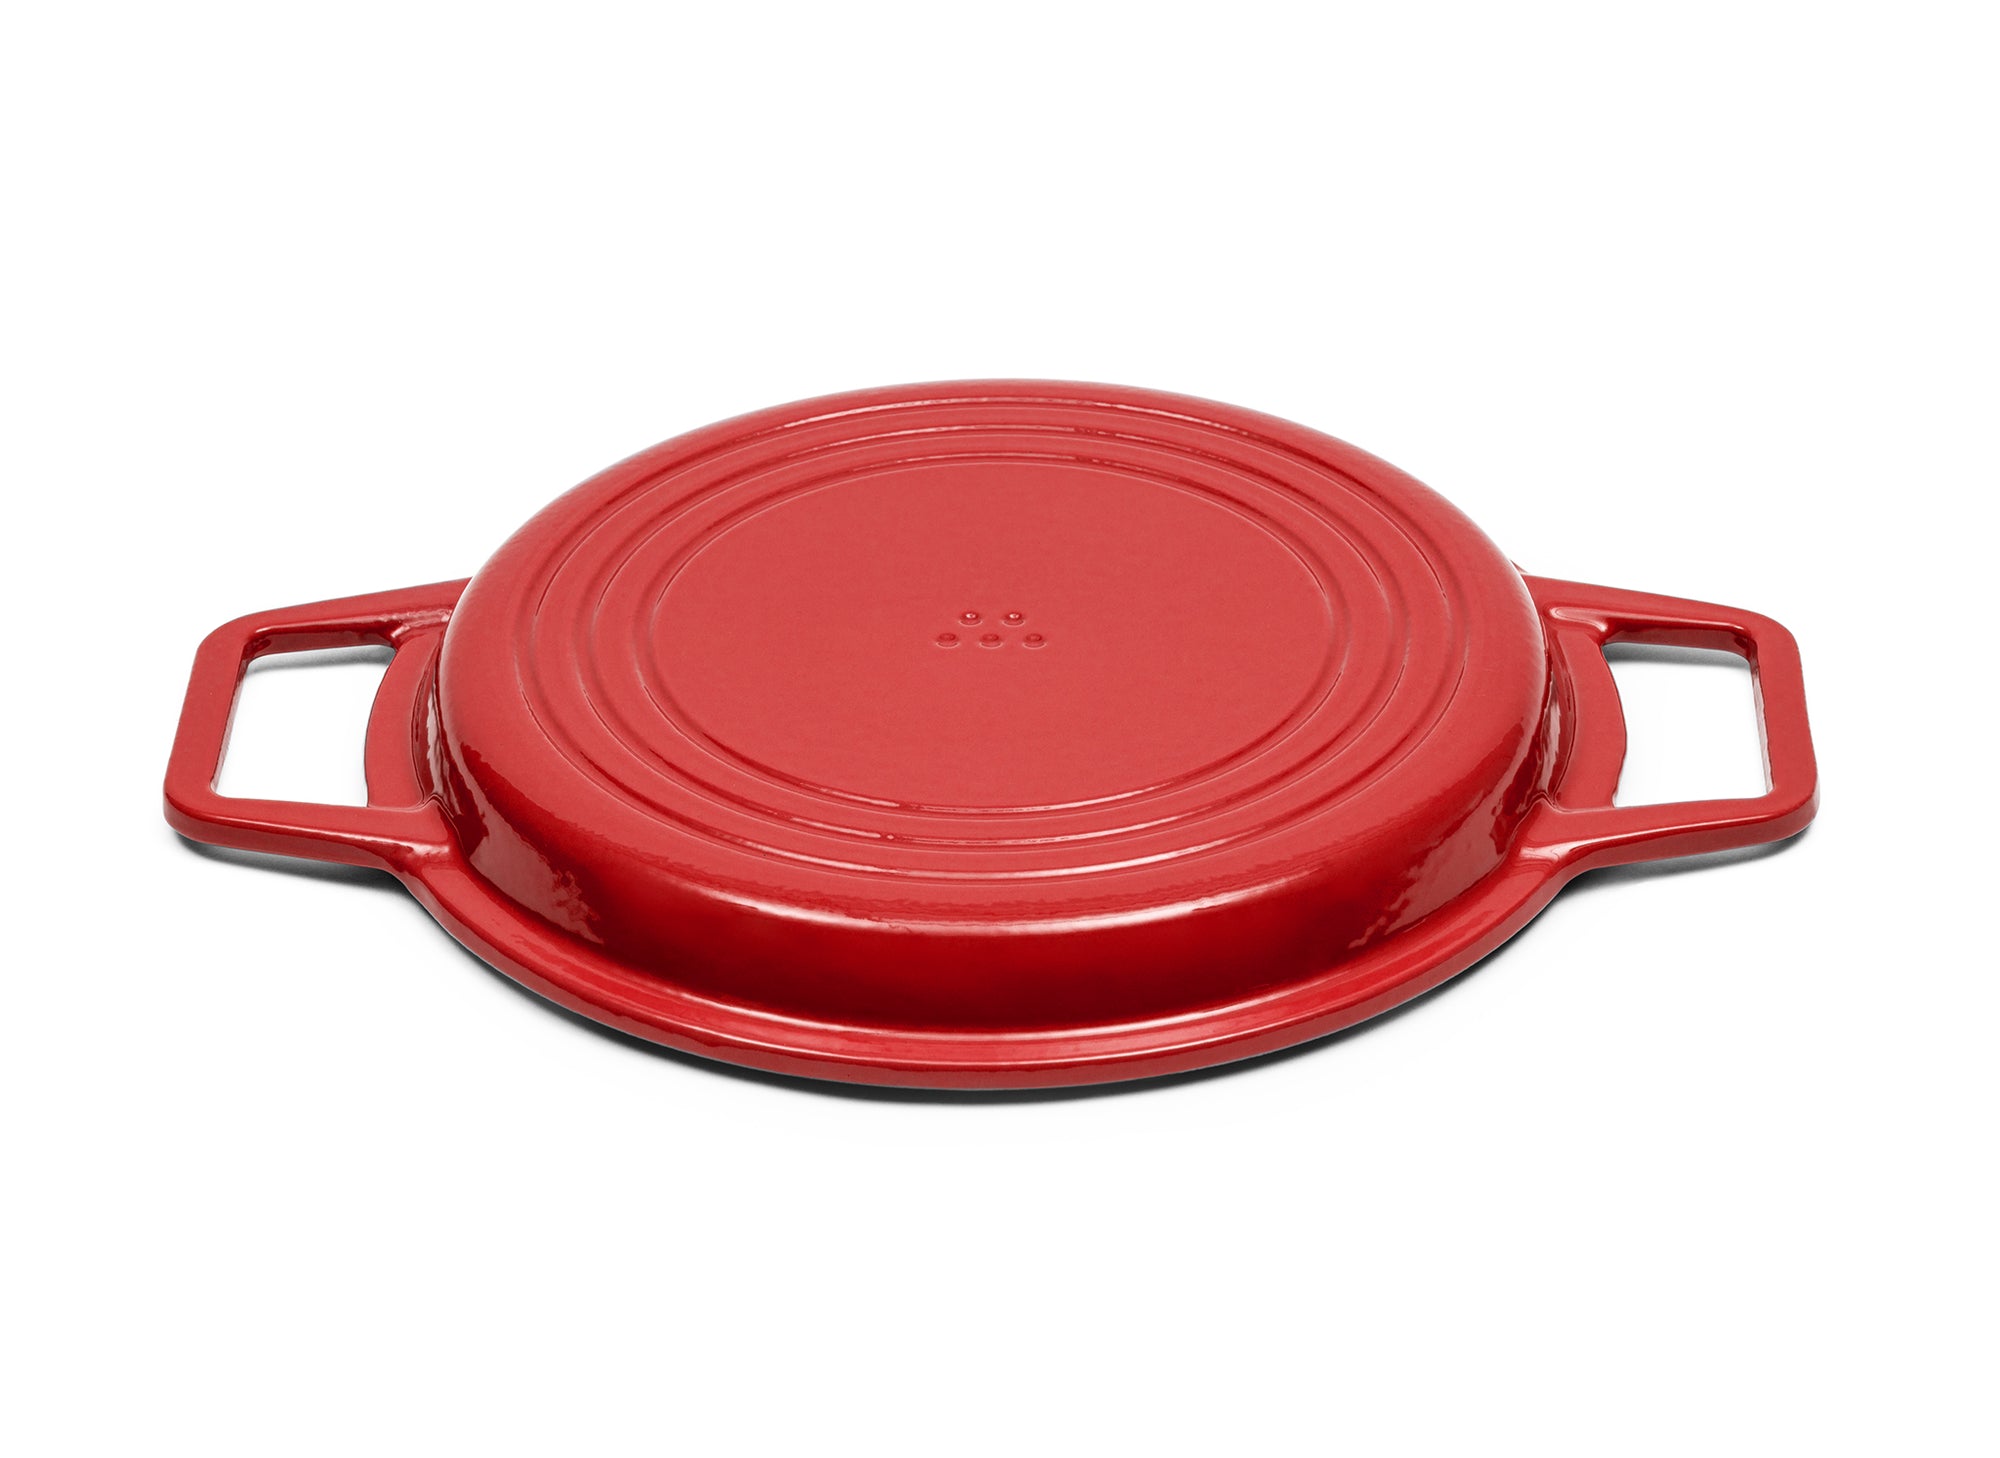 Red Grill Lid for 7-quart Dutch oven face down on white background.